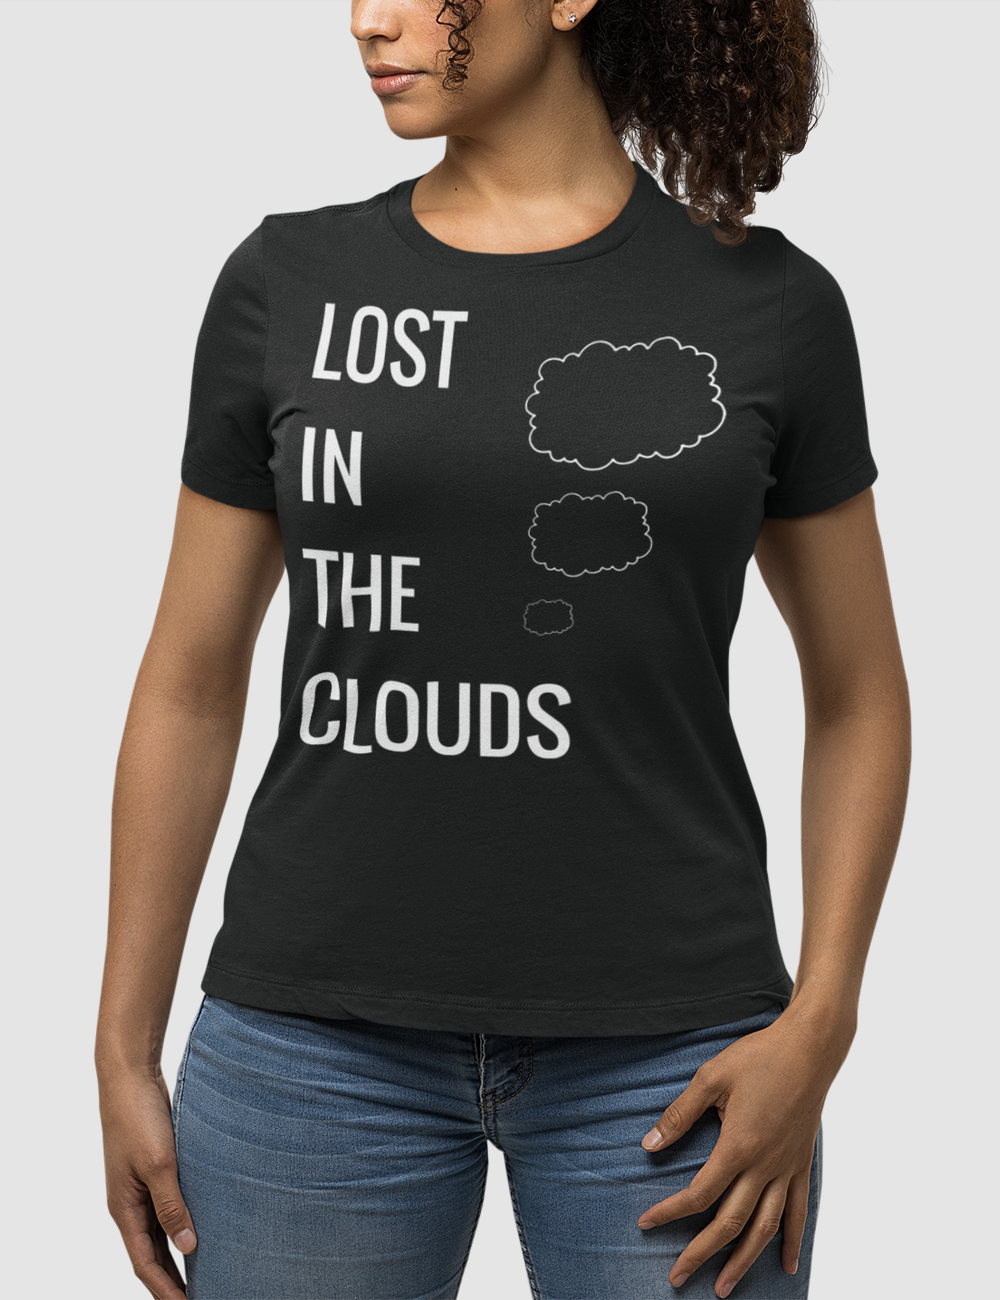 Lost In The Clouds | Women's Fitted T-Shirt OniTakai